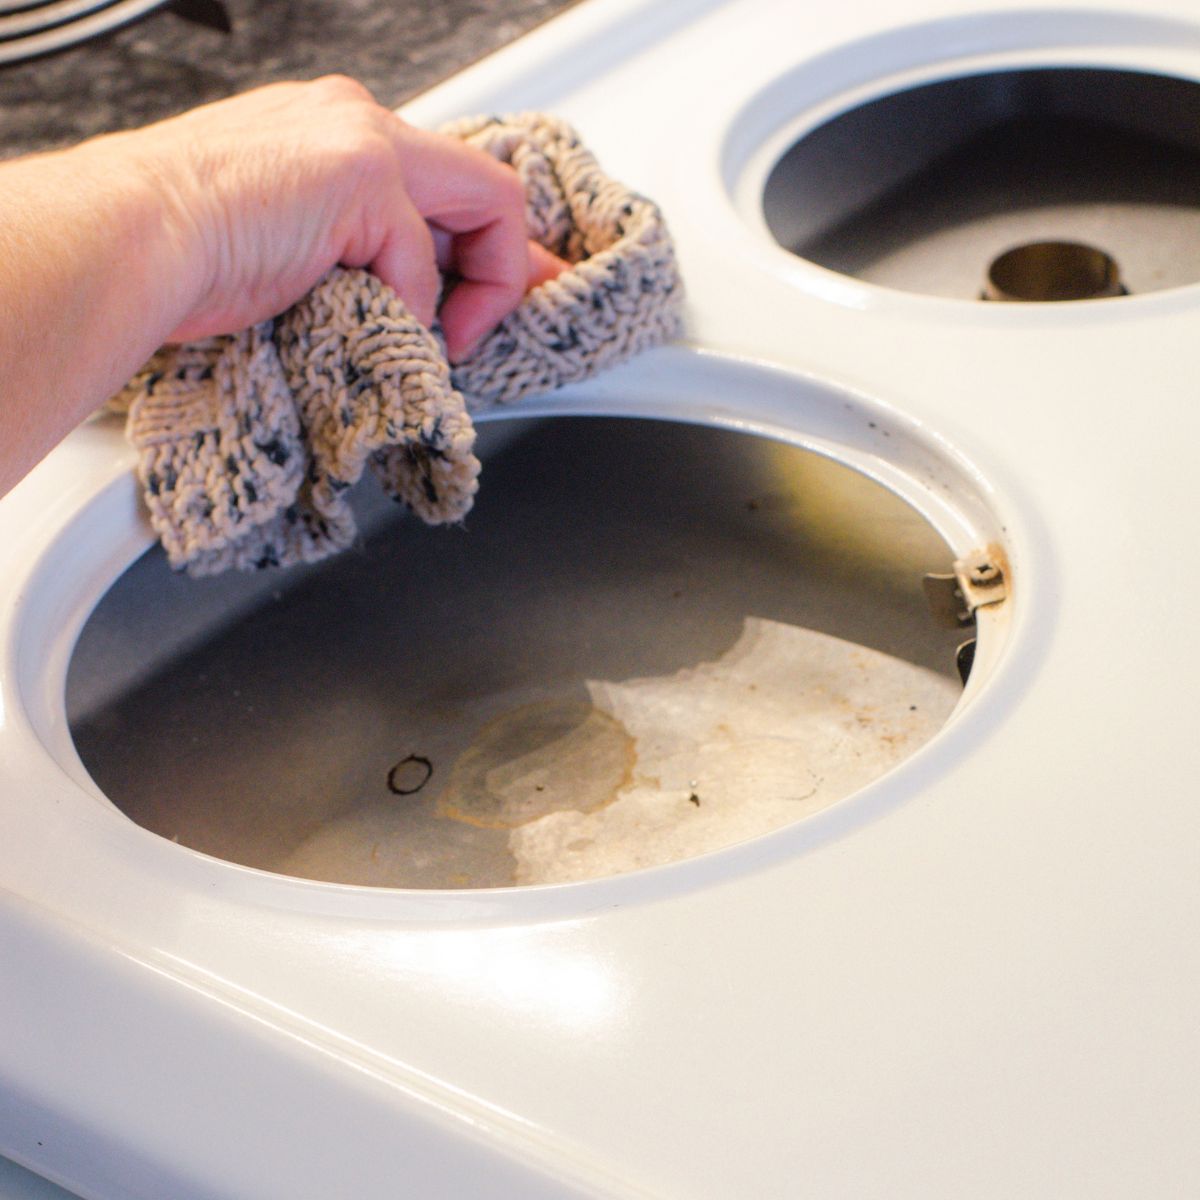 How to Clean an Electric Coil Stovetop the Quick & Easy Way!